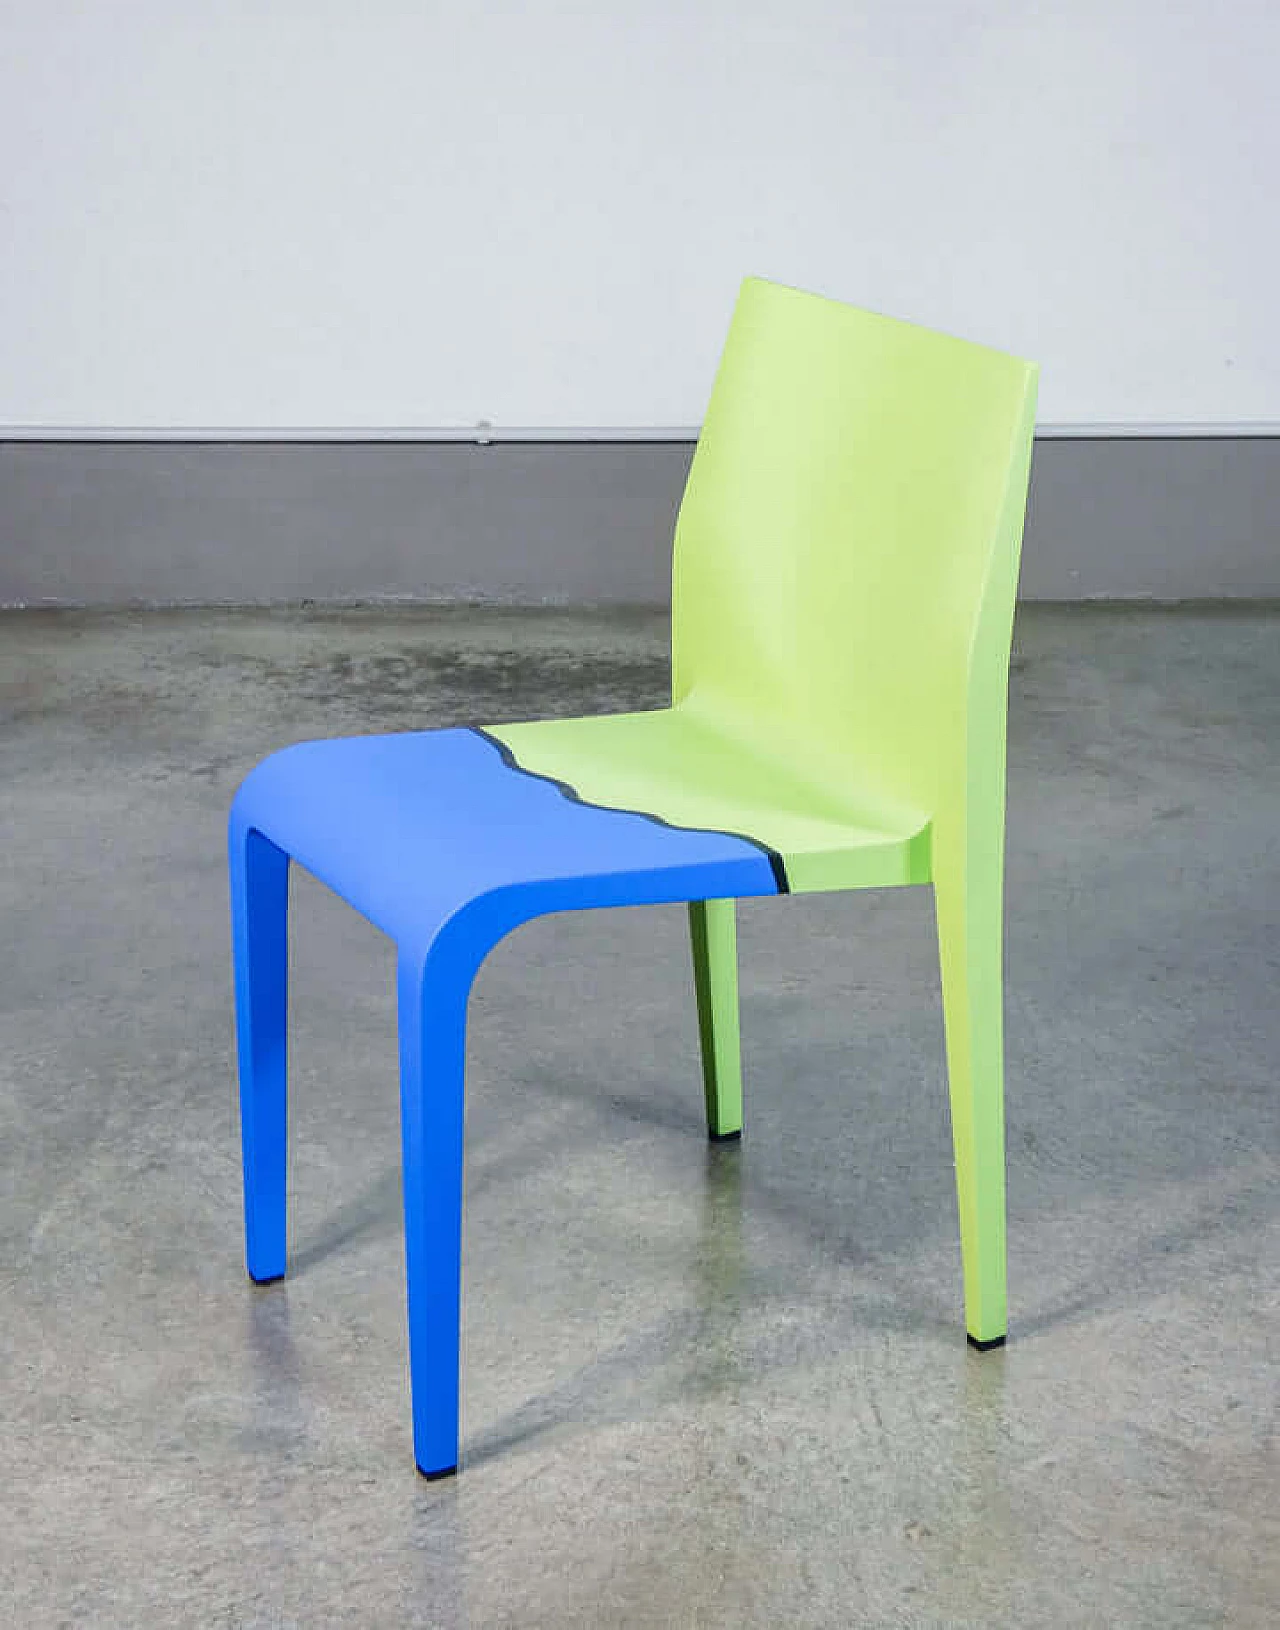 Laleggera 44 chair by Riccardo Blumer for Alias painted by Michelangelo Pistoletto, 2009 4